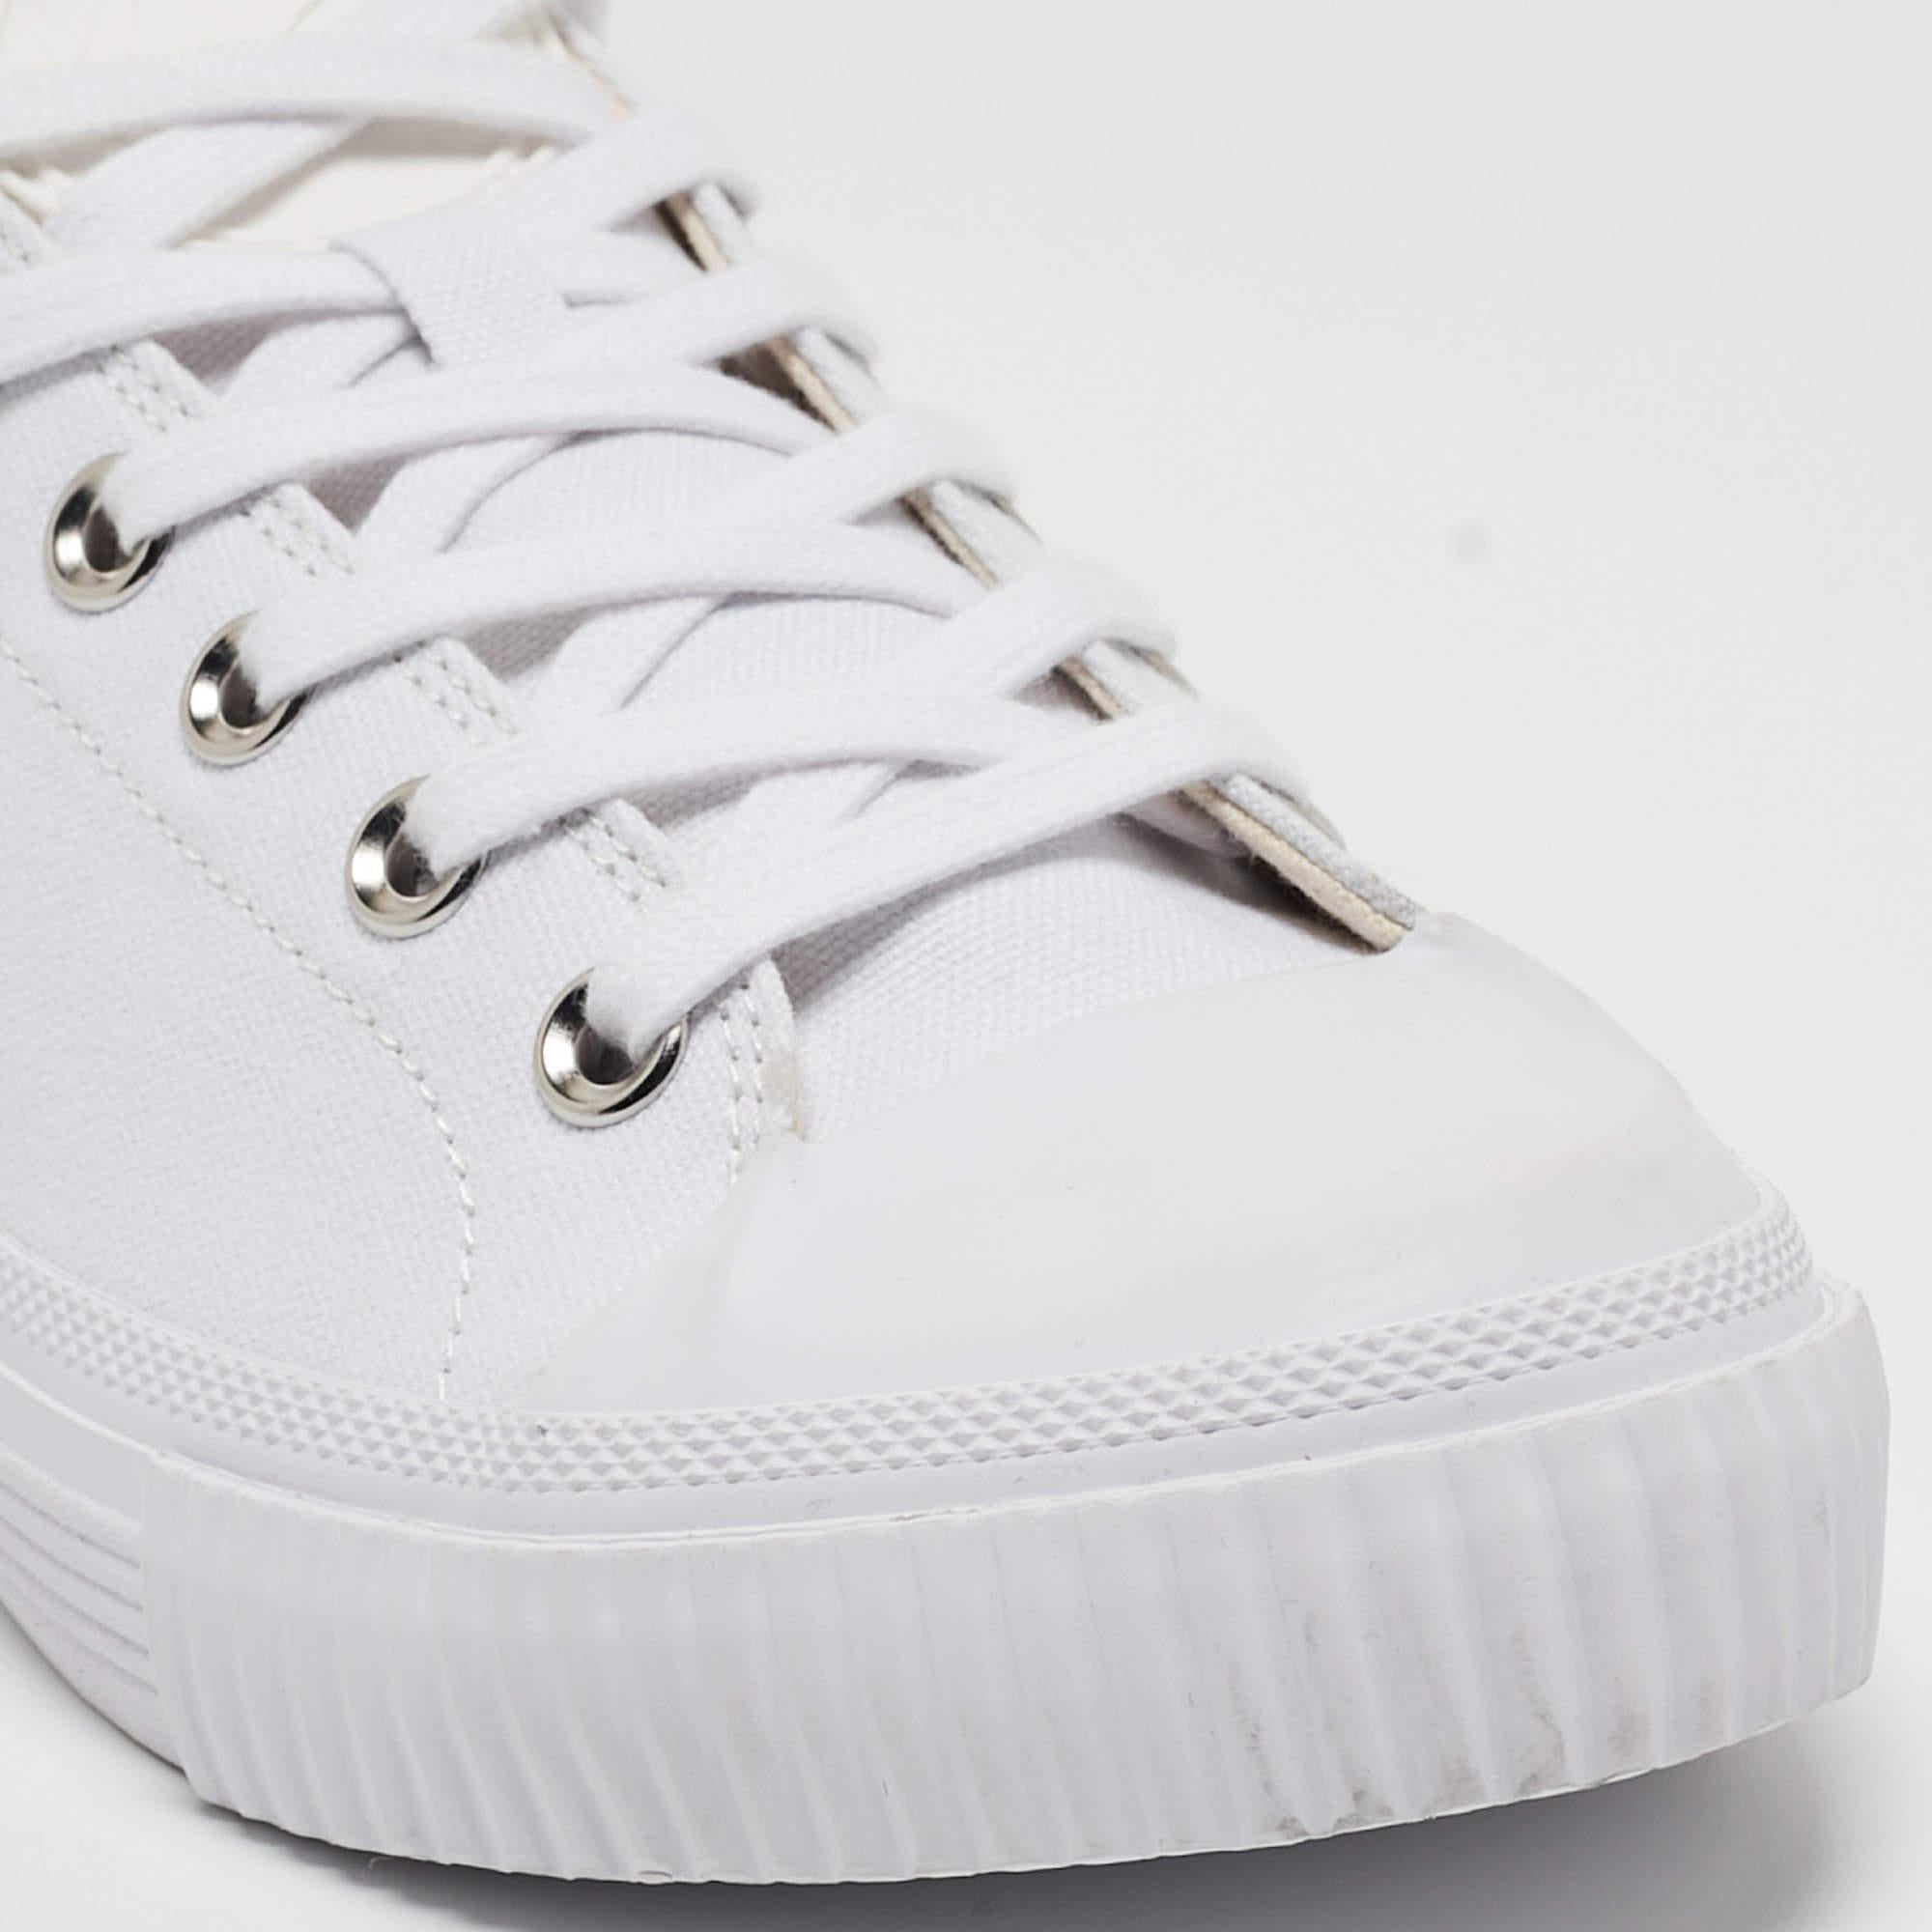 McQ by Alexander McQueen White/Black Canvas Shallow Swarm Sneakers Size 40 3